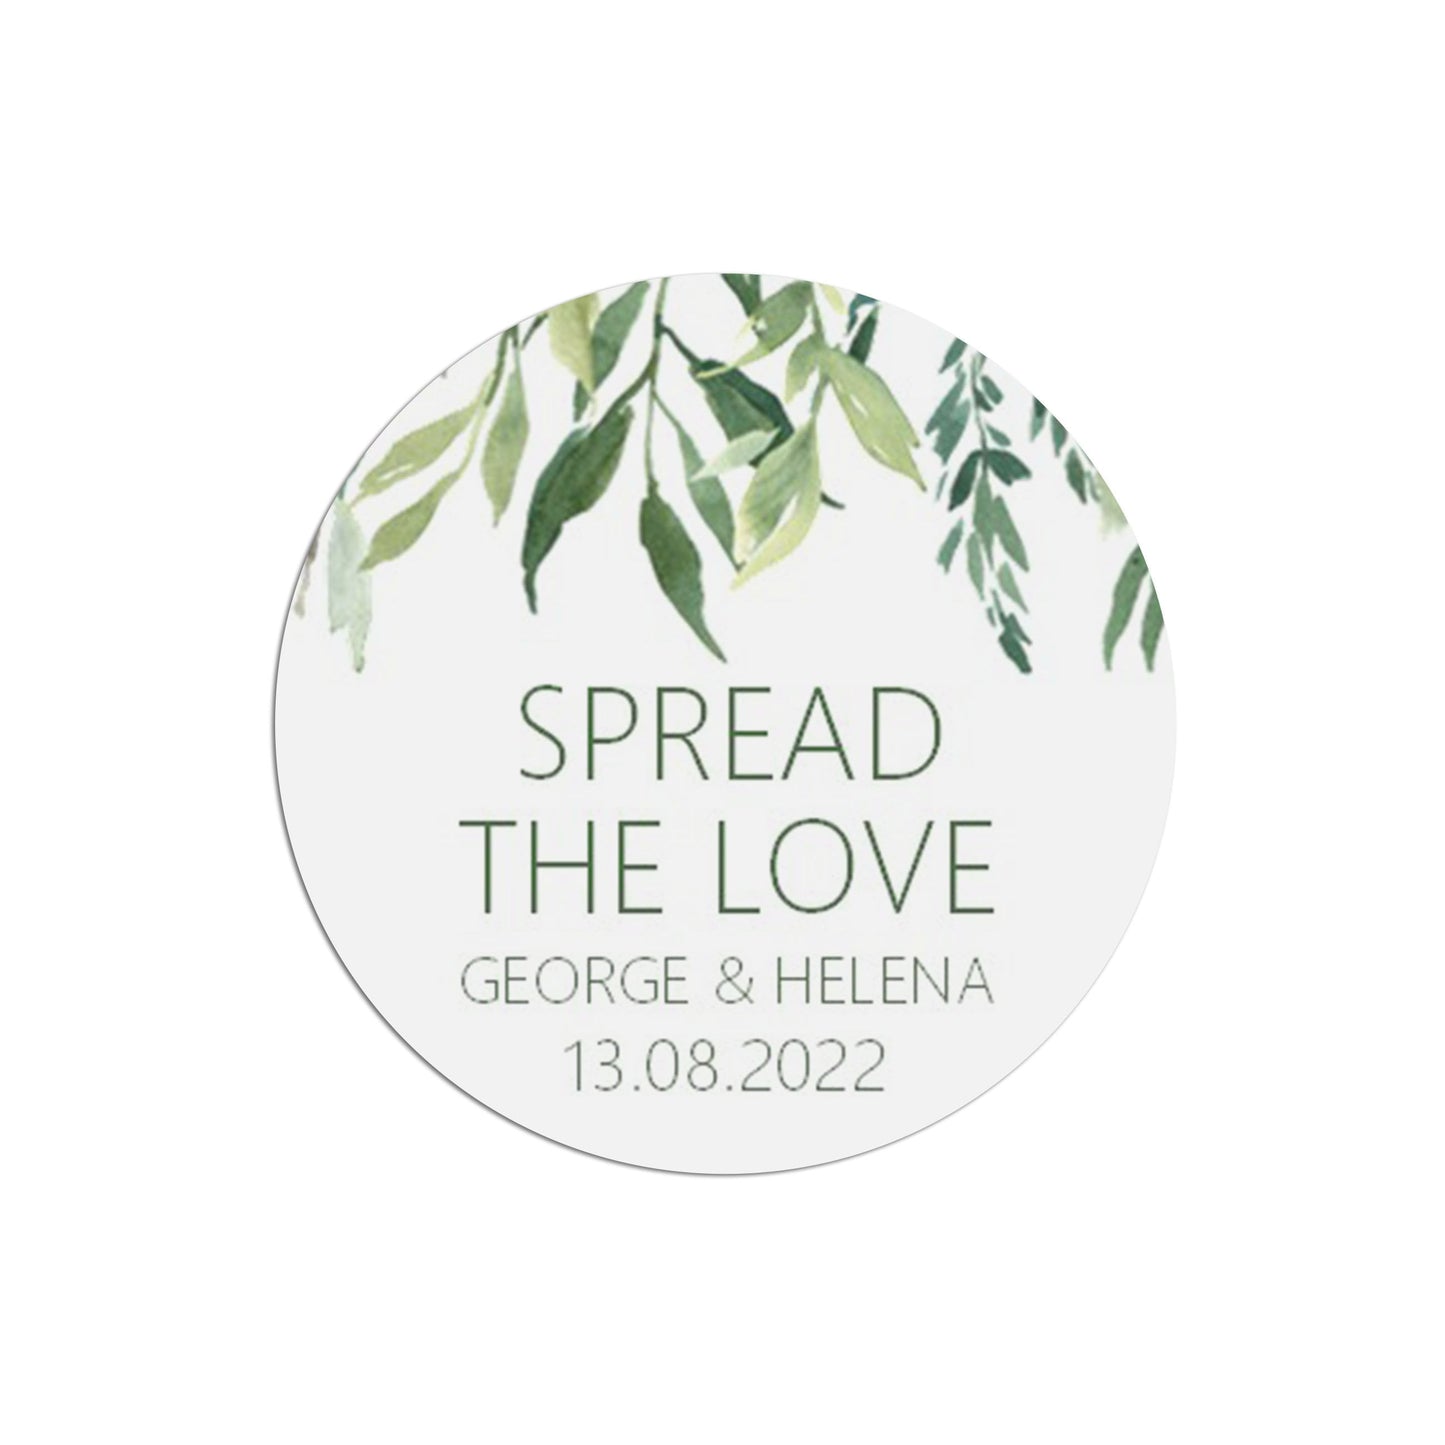 Spread The Love Wedding Stickers, Greenery 37mm Round With Personalisation At The Bottom x 35 Stickers Per Sheet